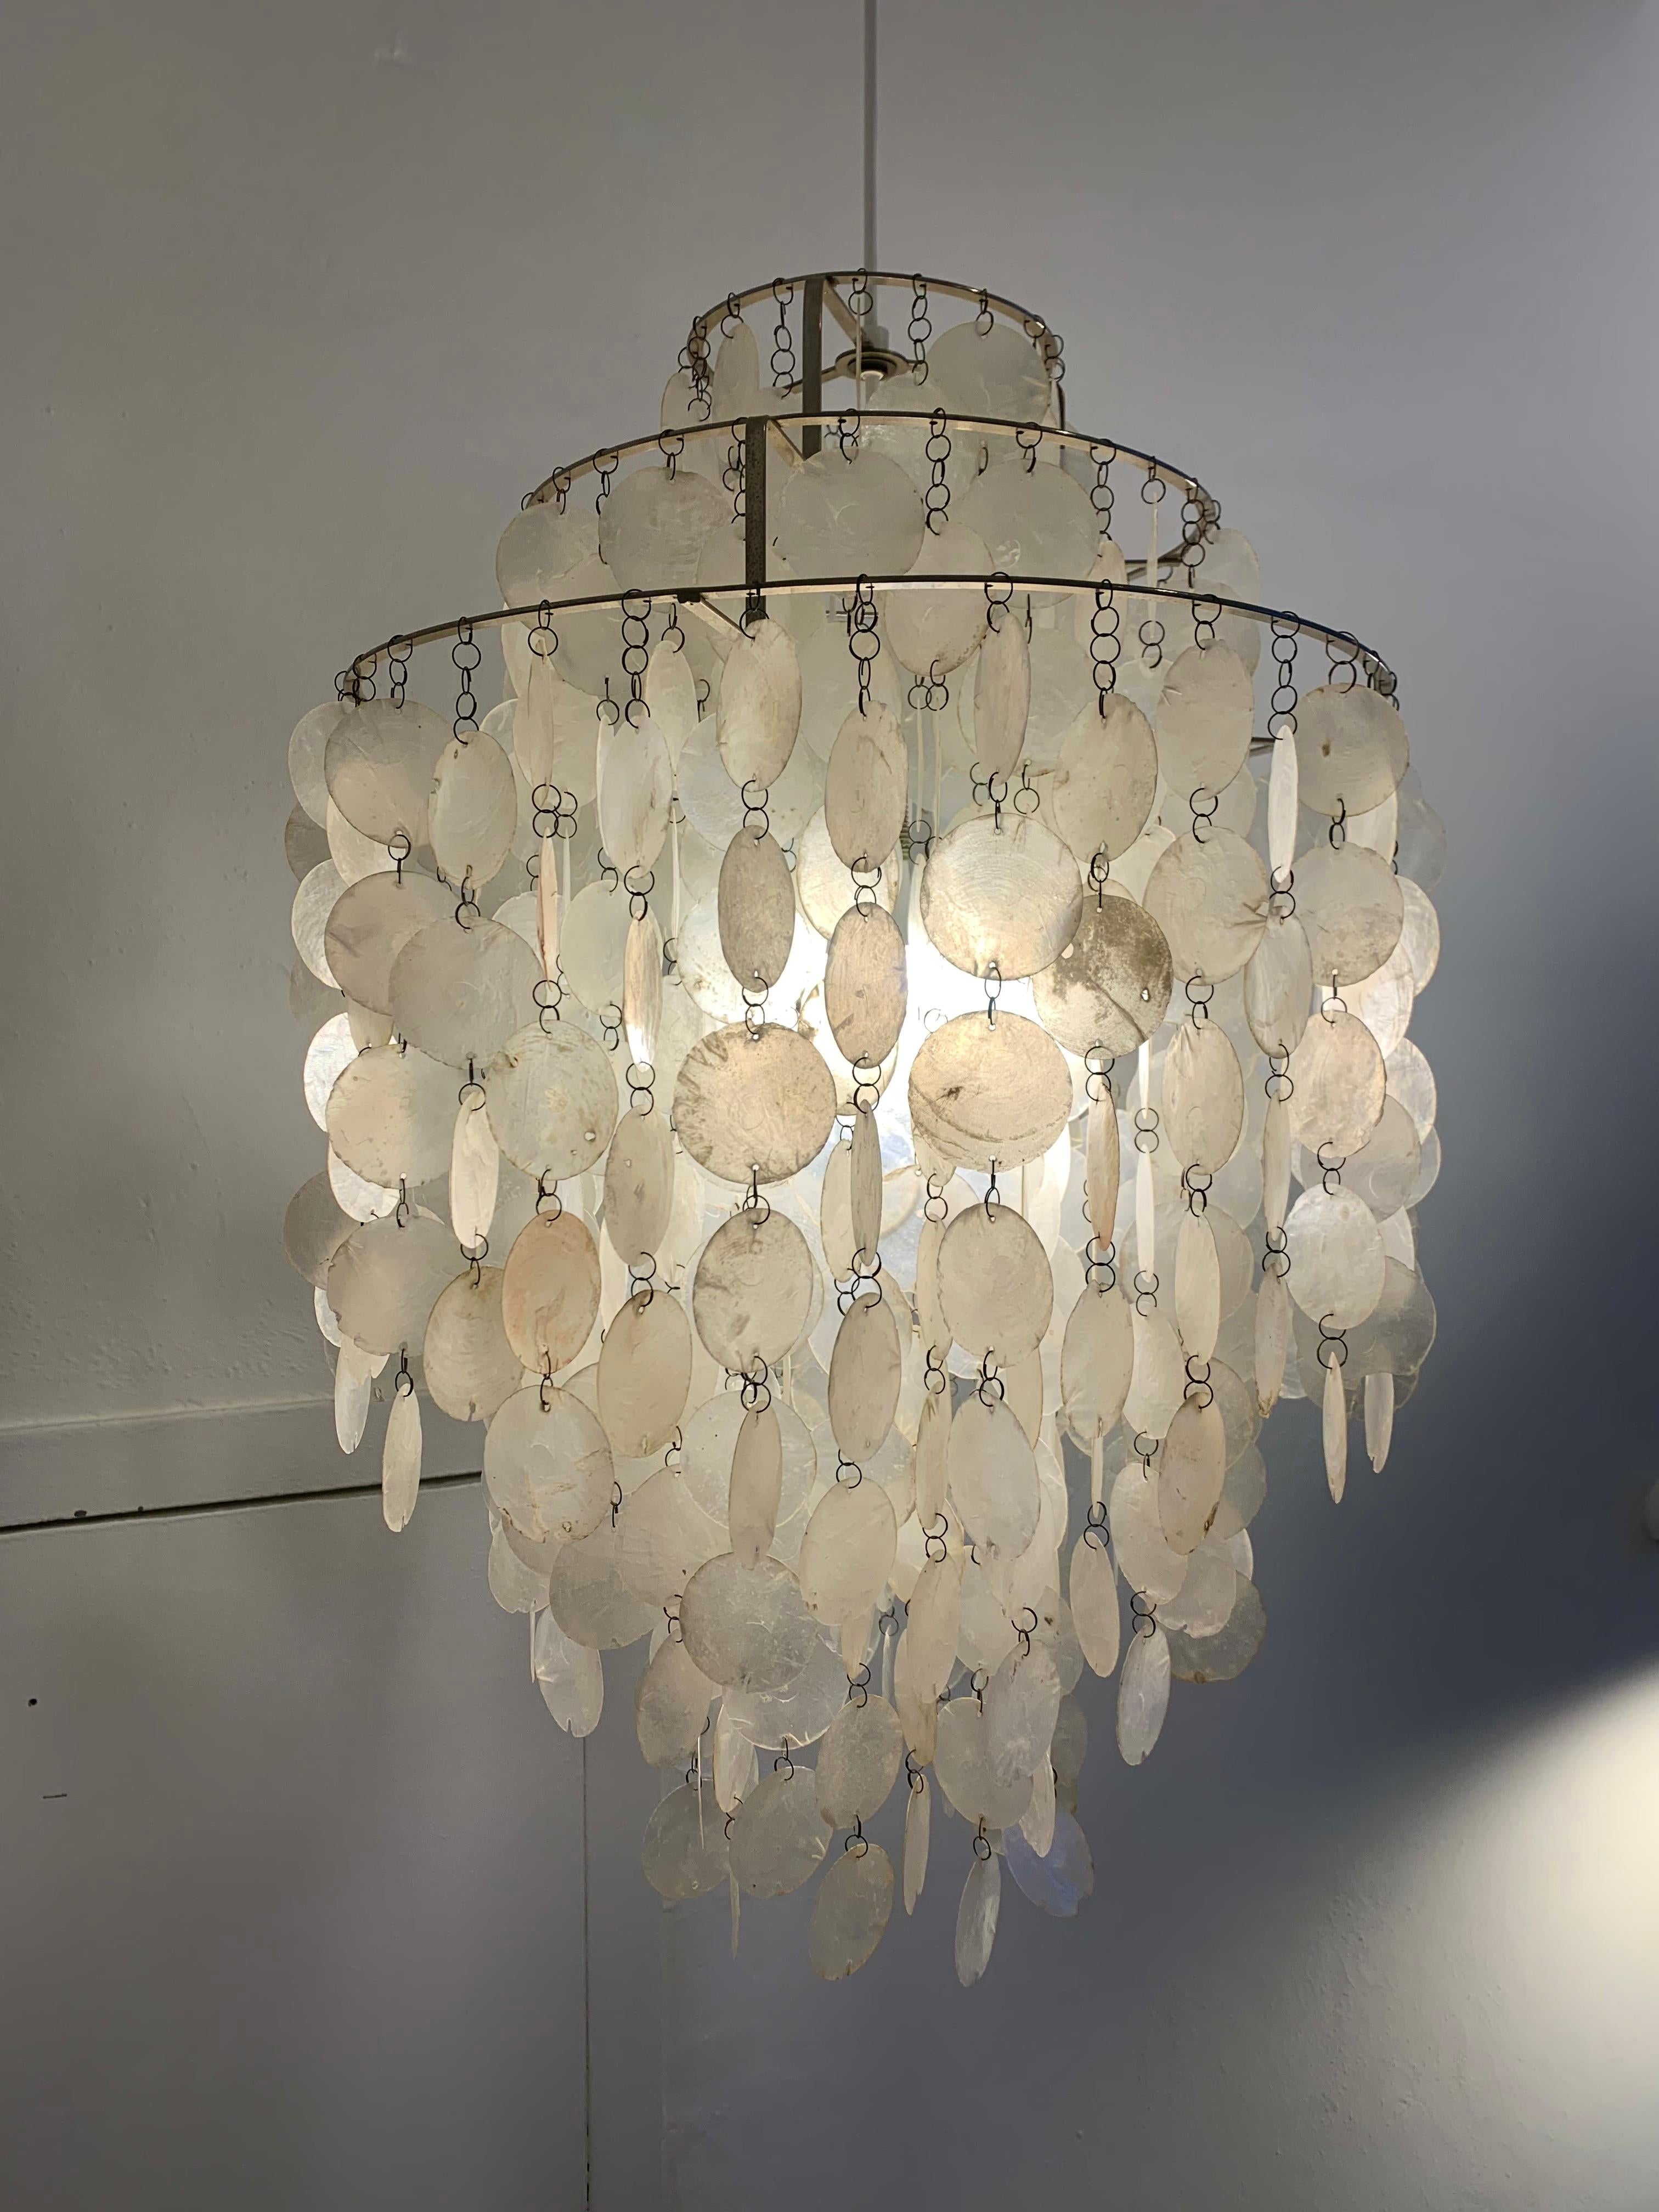 Mother-of-pearl Fun 1DM pendant designed by the Danish designer Verner Panton in 1964, part of a series of luminaires under the name 'Fun'.
Base structure of steel on which chains with mother-of-pearl discs are mounted. When the wind catches the